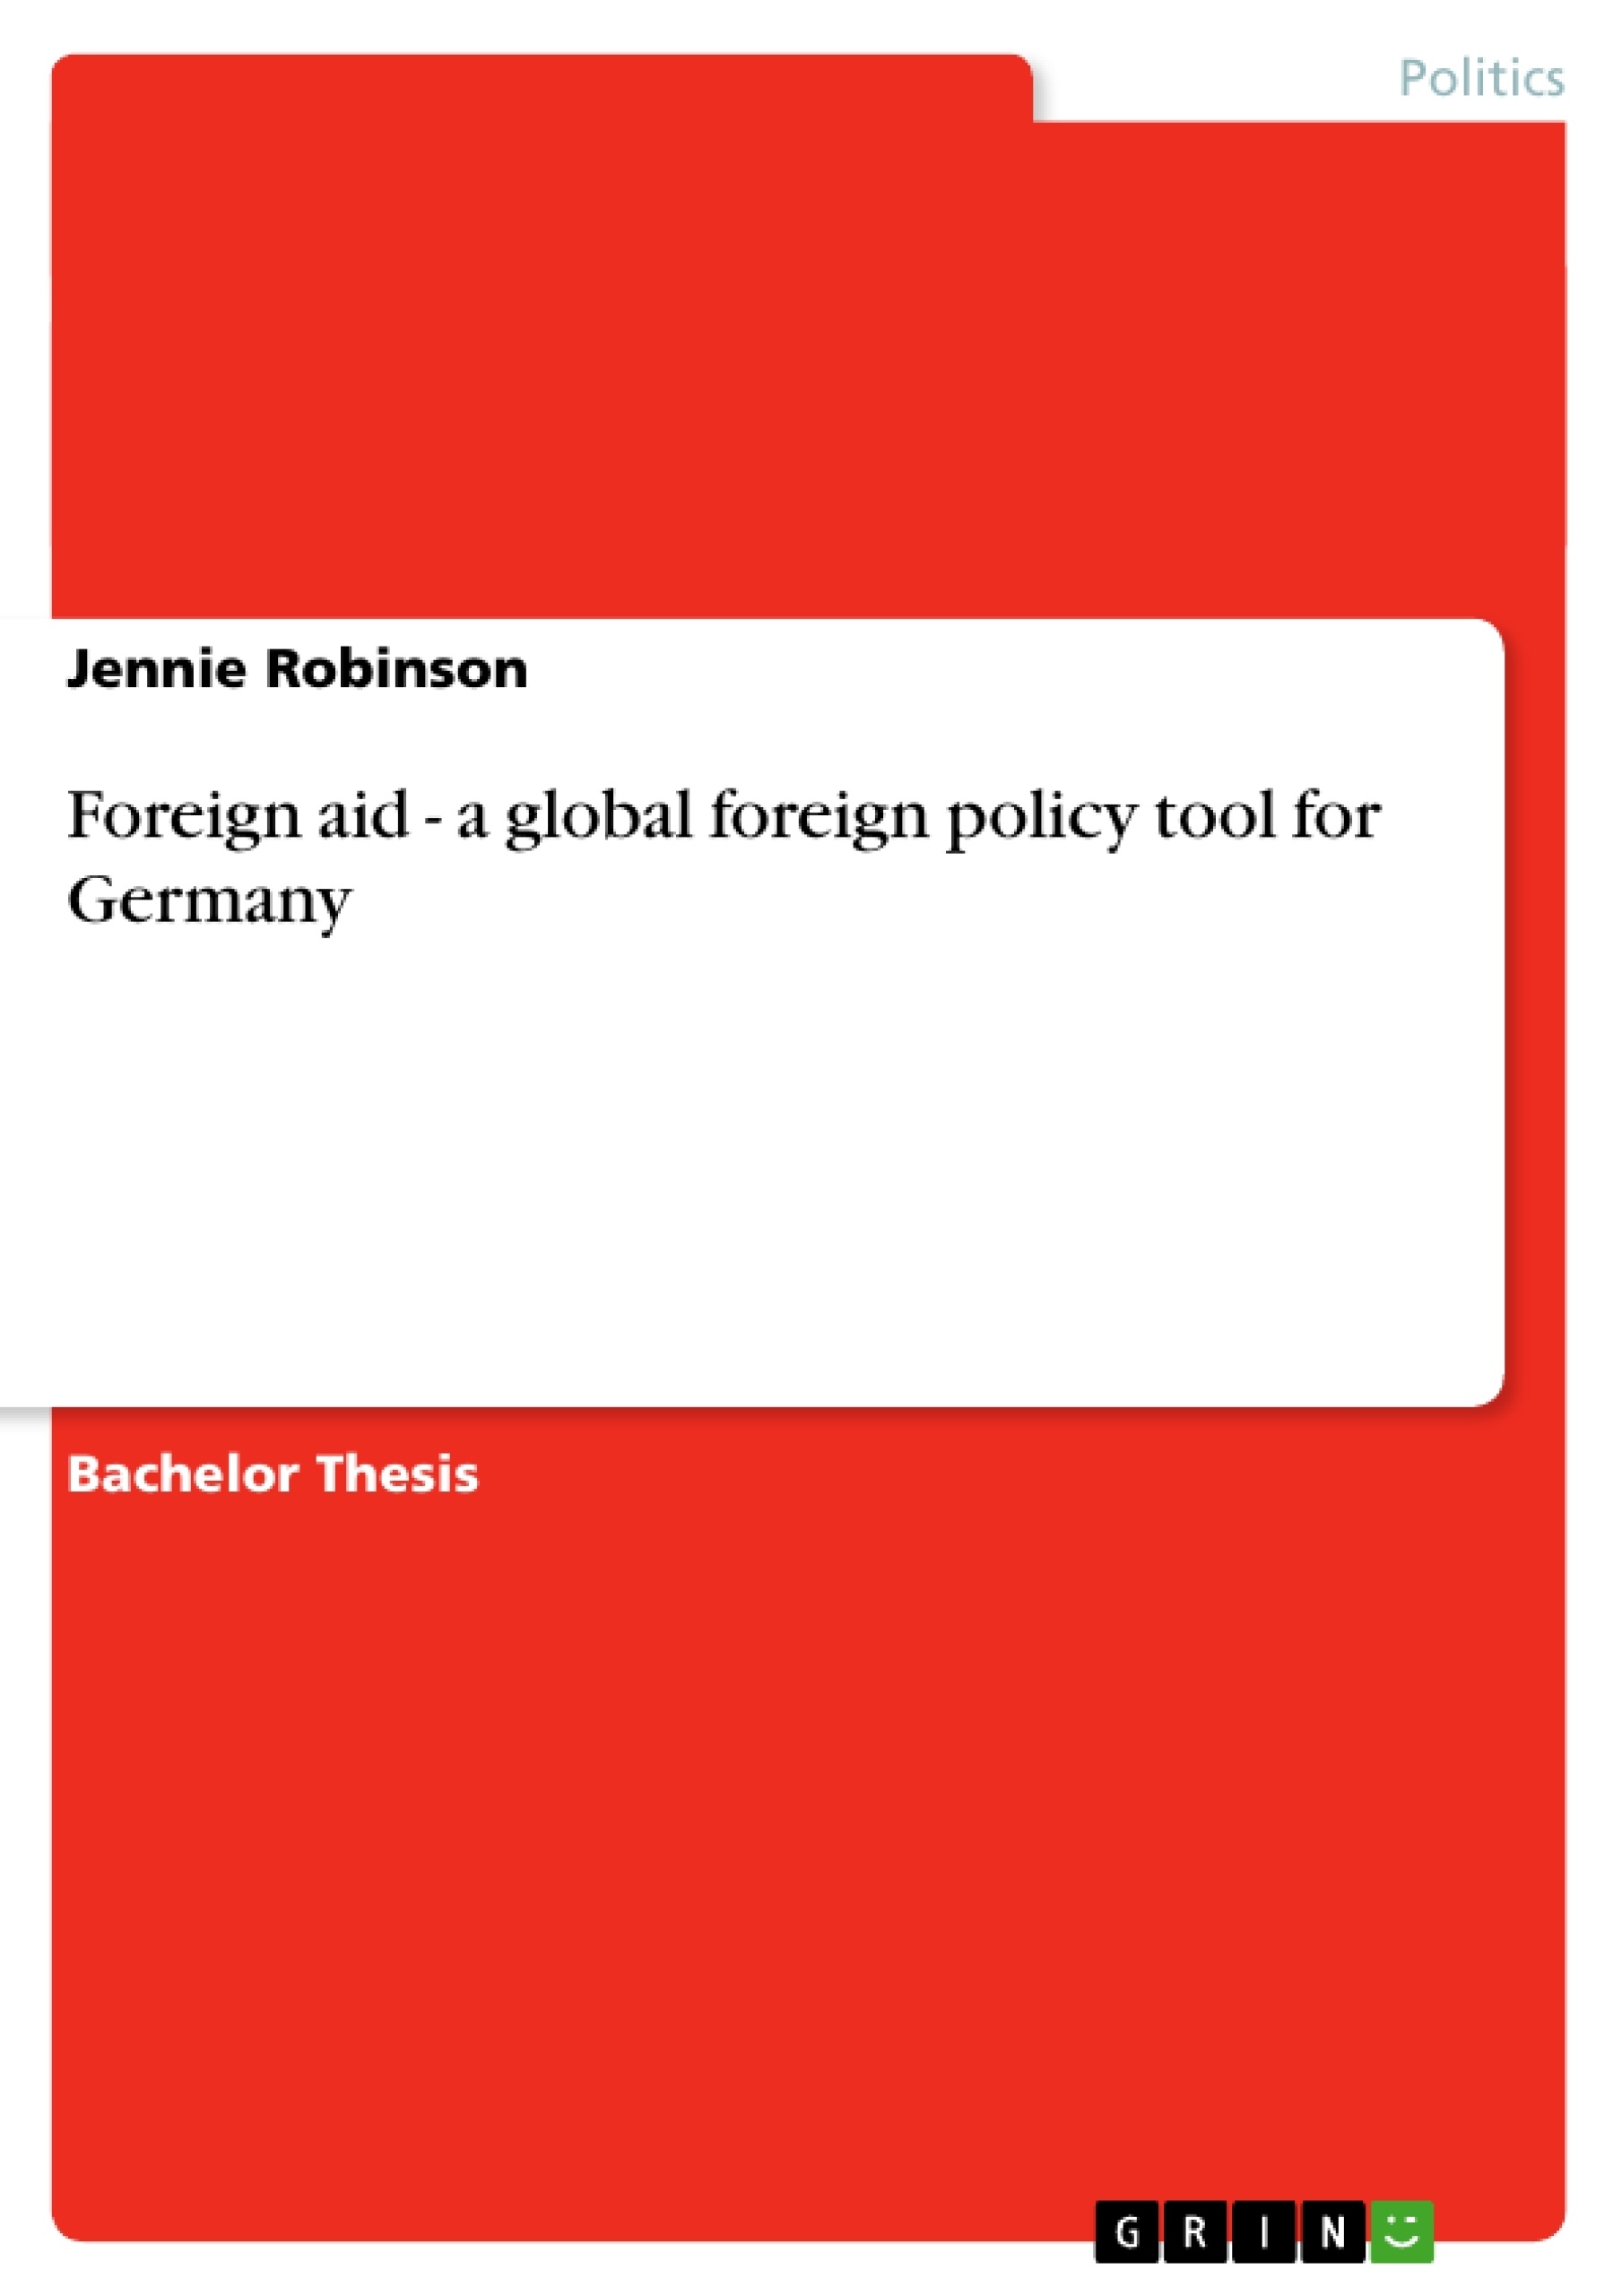 Title: Foreign aid - a global foreign policy tool for Germany